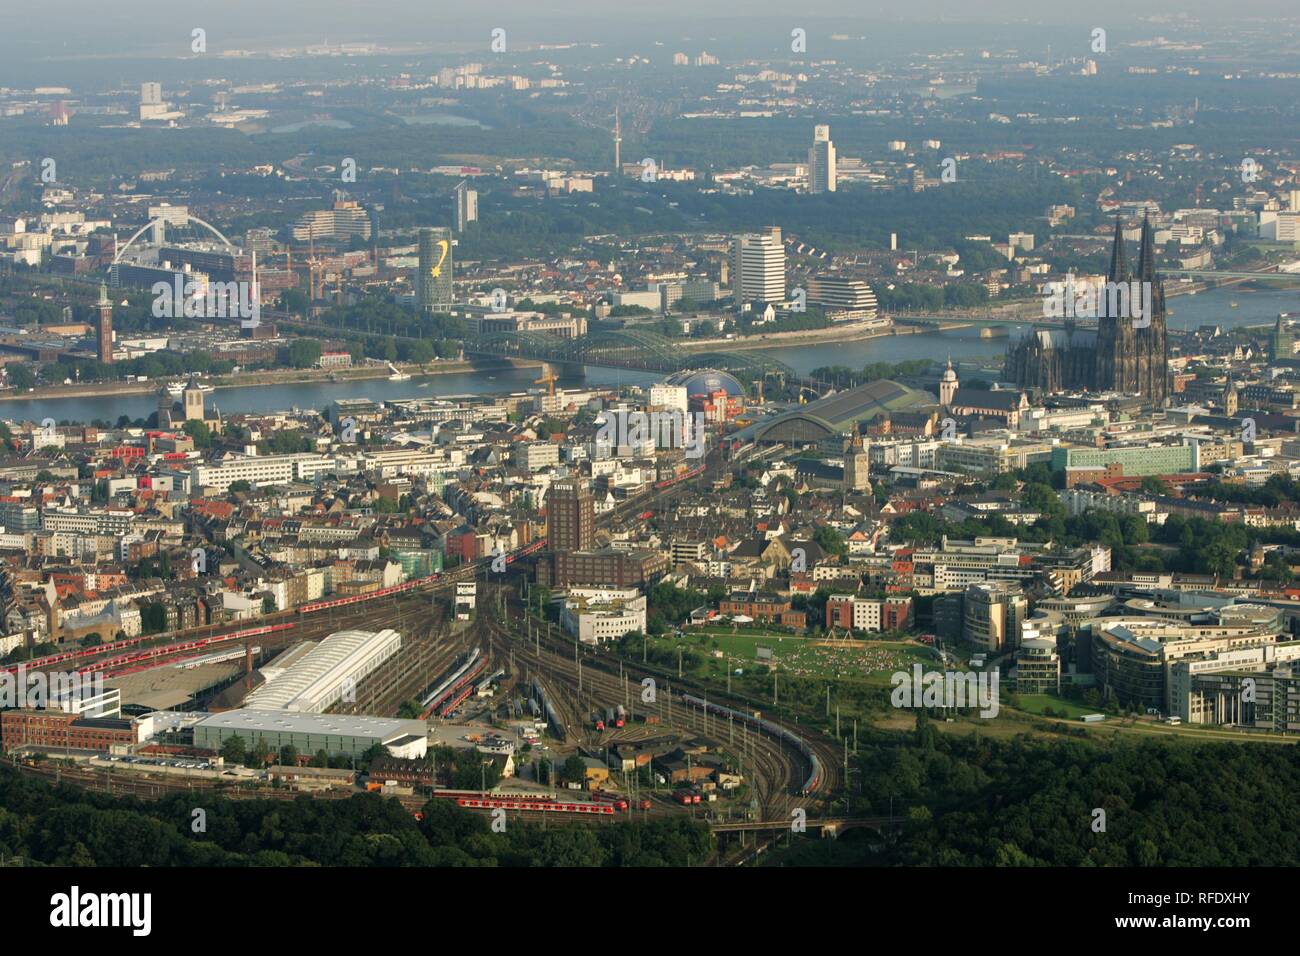 DEU, Germany, Cologne : Areal View of the city center. Cathedral. Main railway station. River Rhine. | Stock Photo